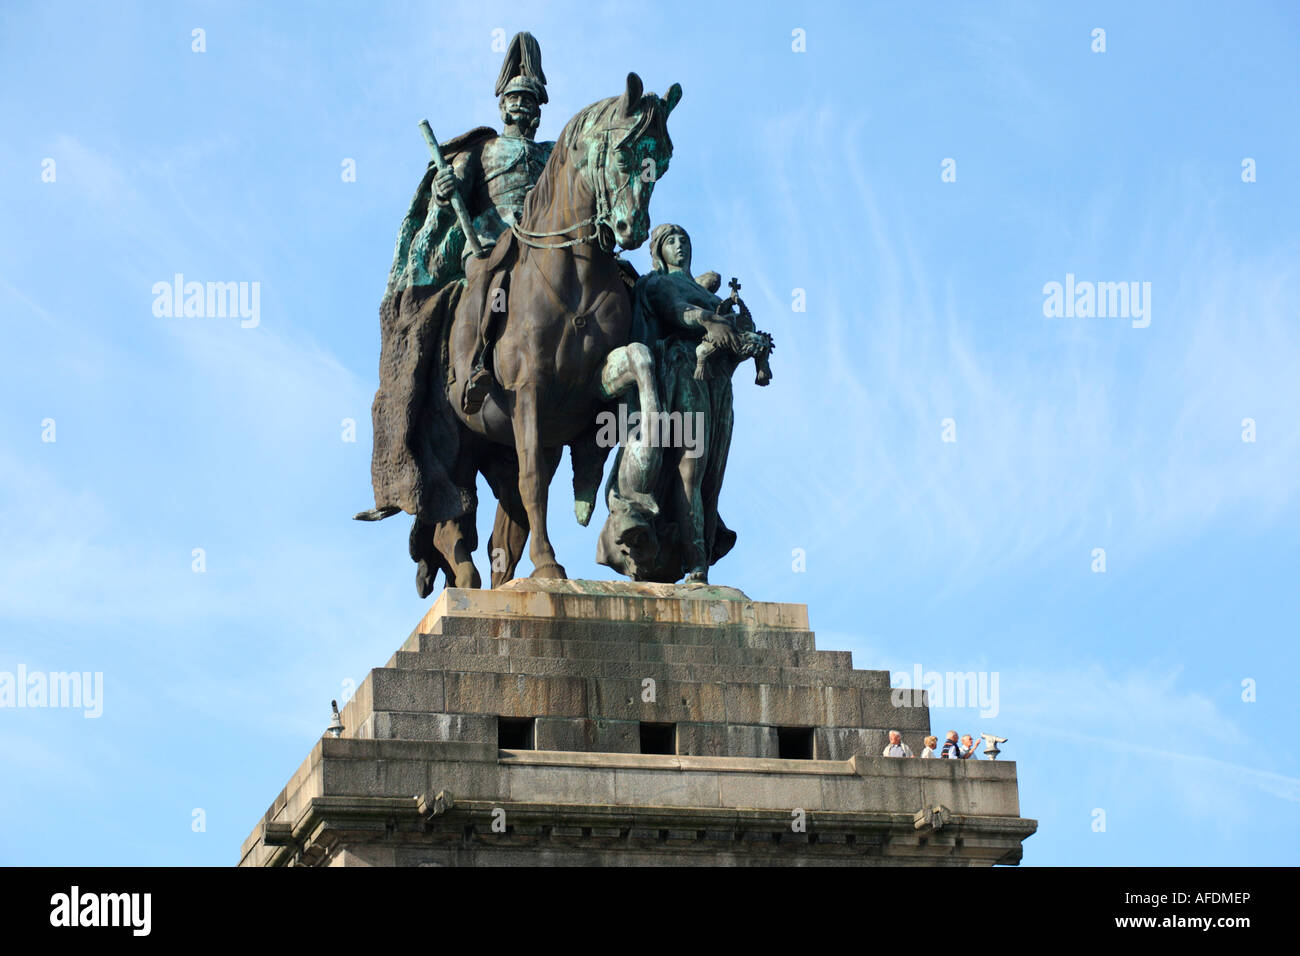 The Equestrian statue of Kaiser Wilhelm I. at the German Corner (Deutsches Eck) in Koblenz in Germany. Stock Photo